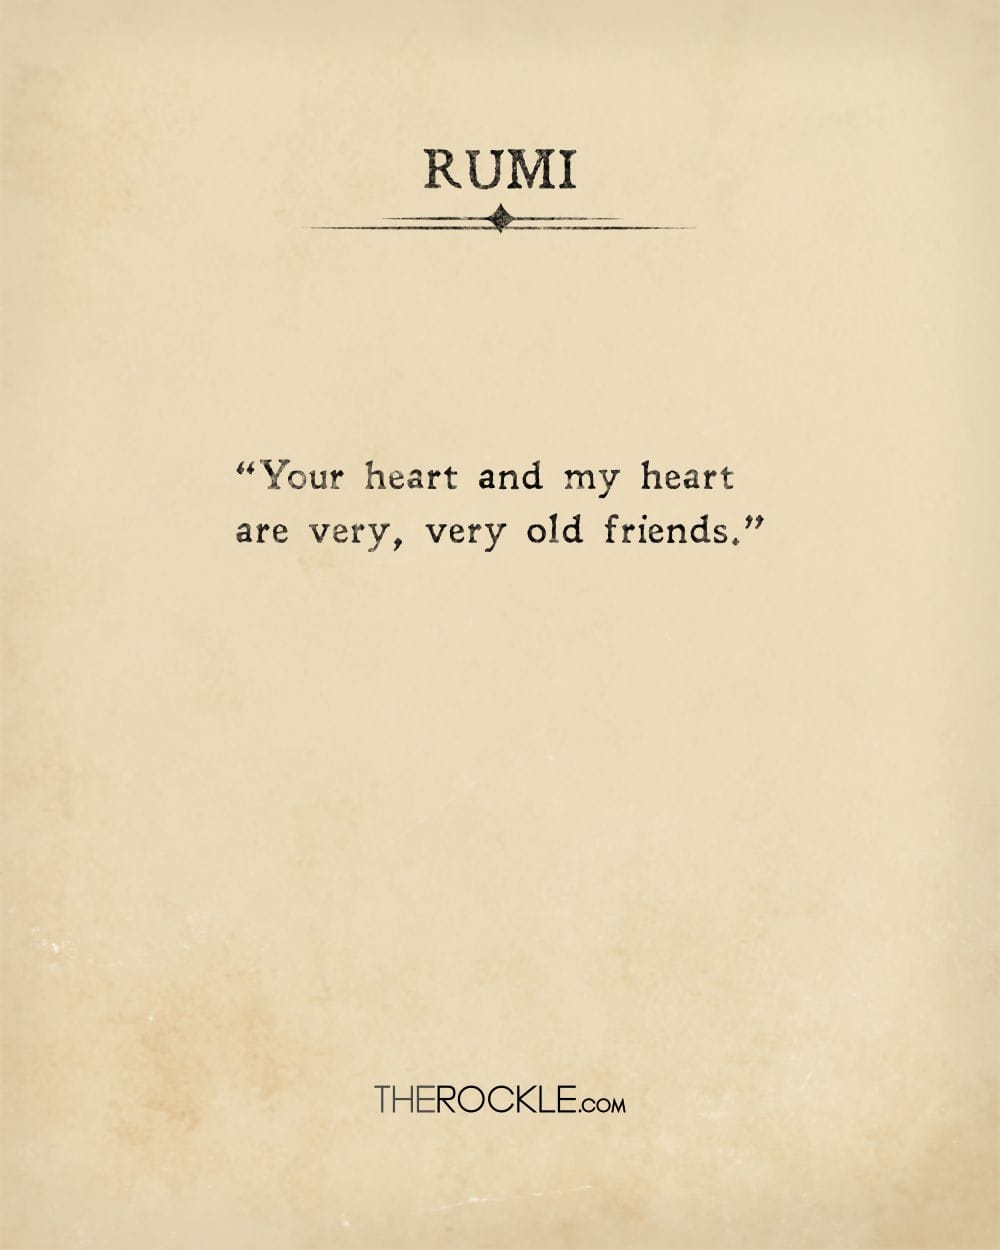 Rumi's quote about deep connections